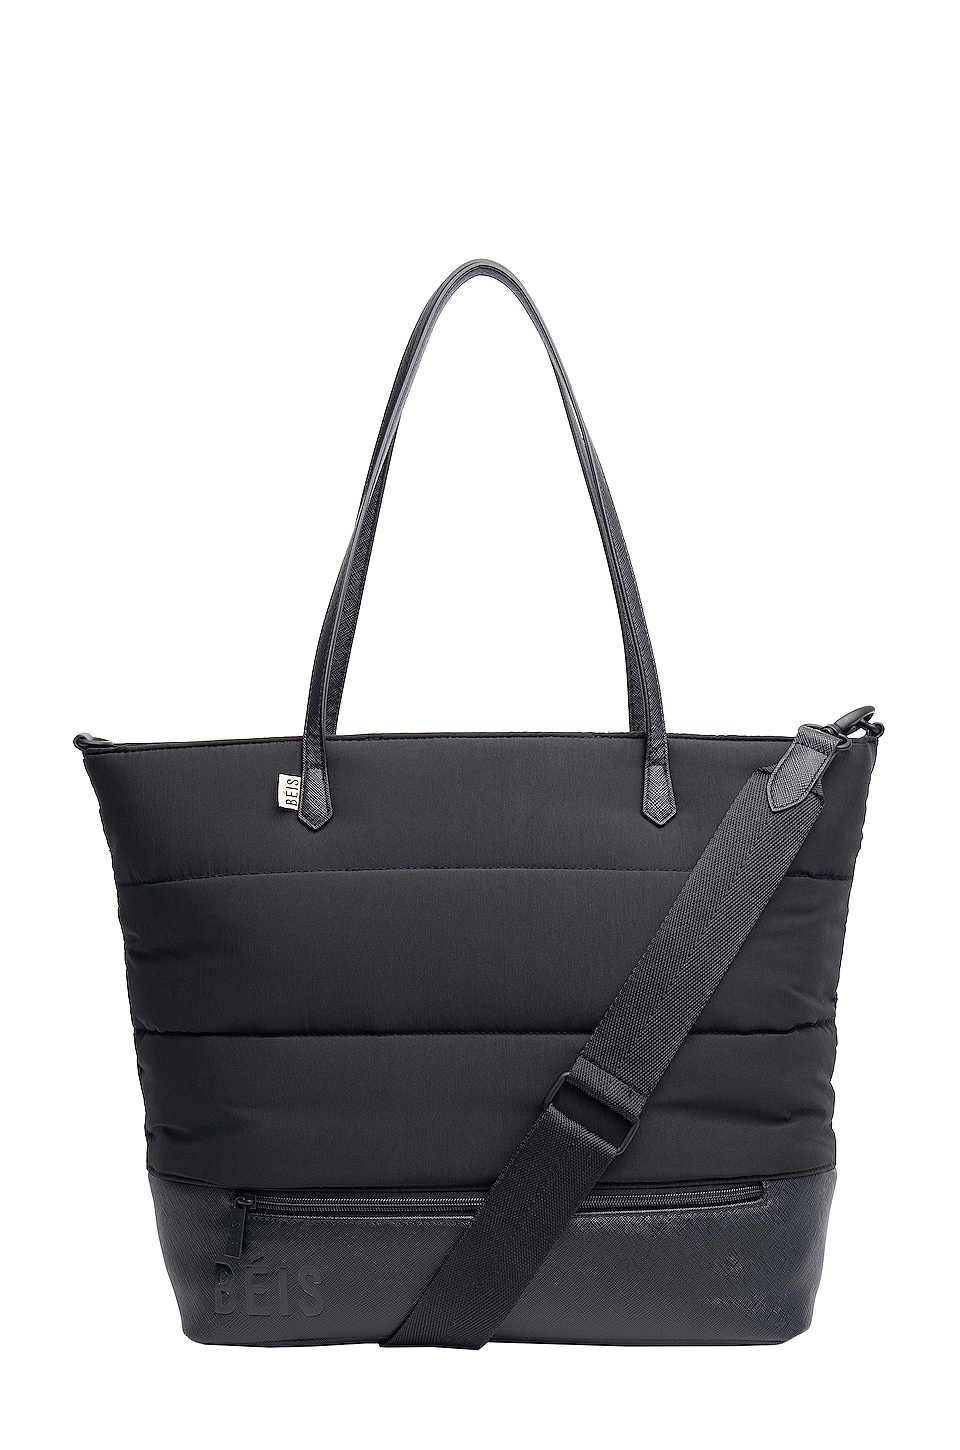 BEIS The Carry-All Tote in Black | REVOLVE